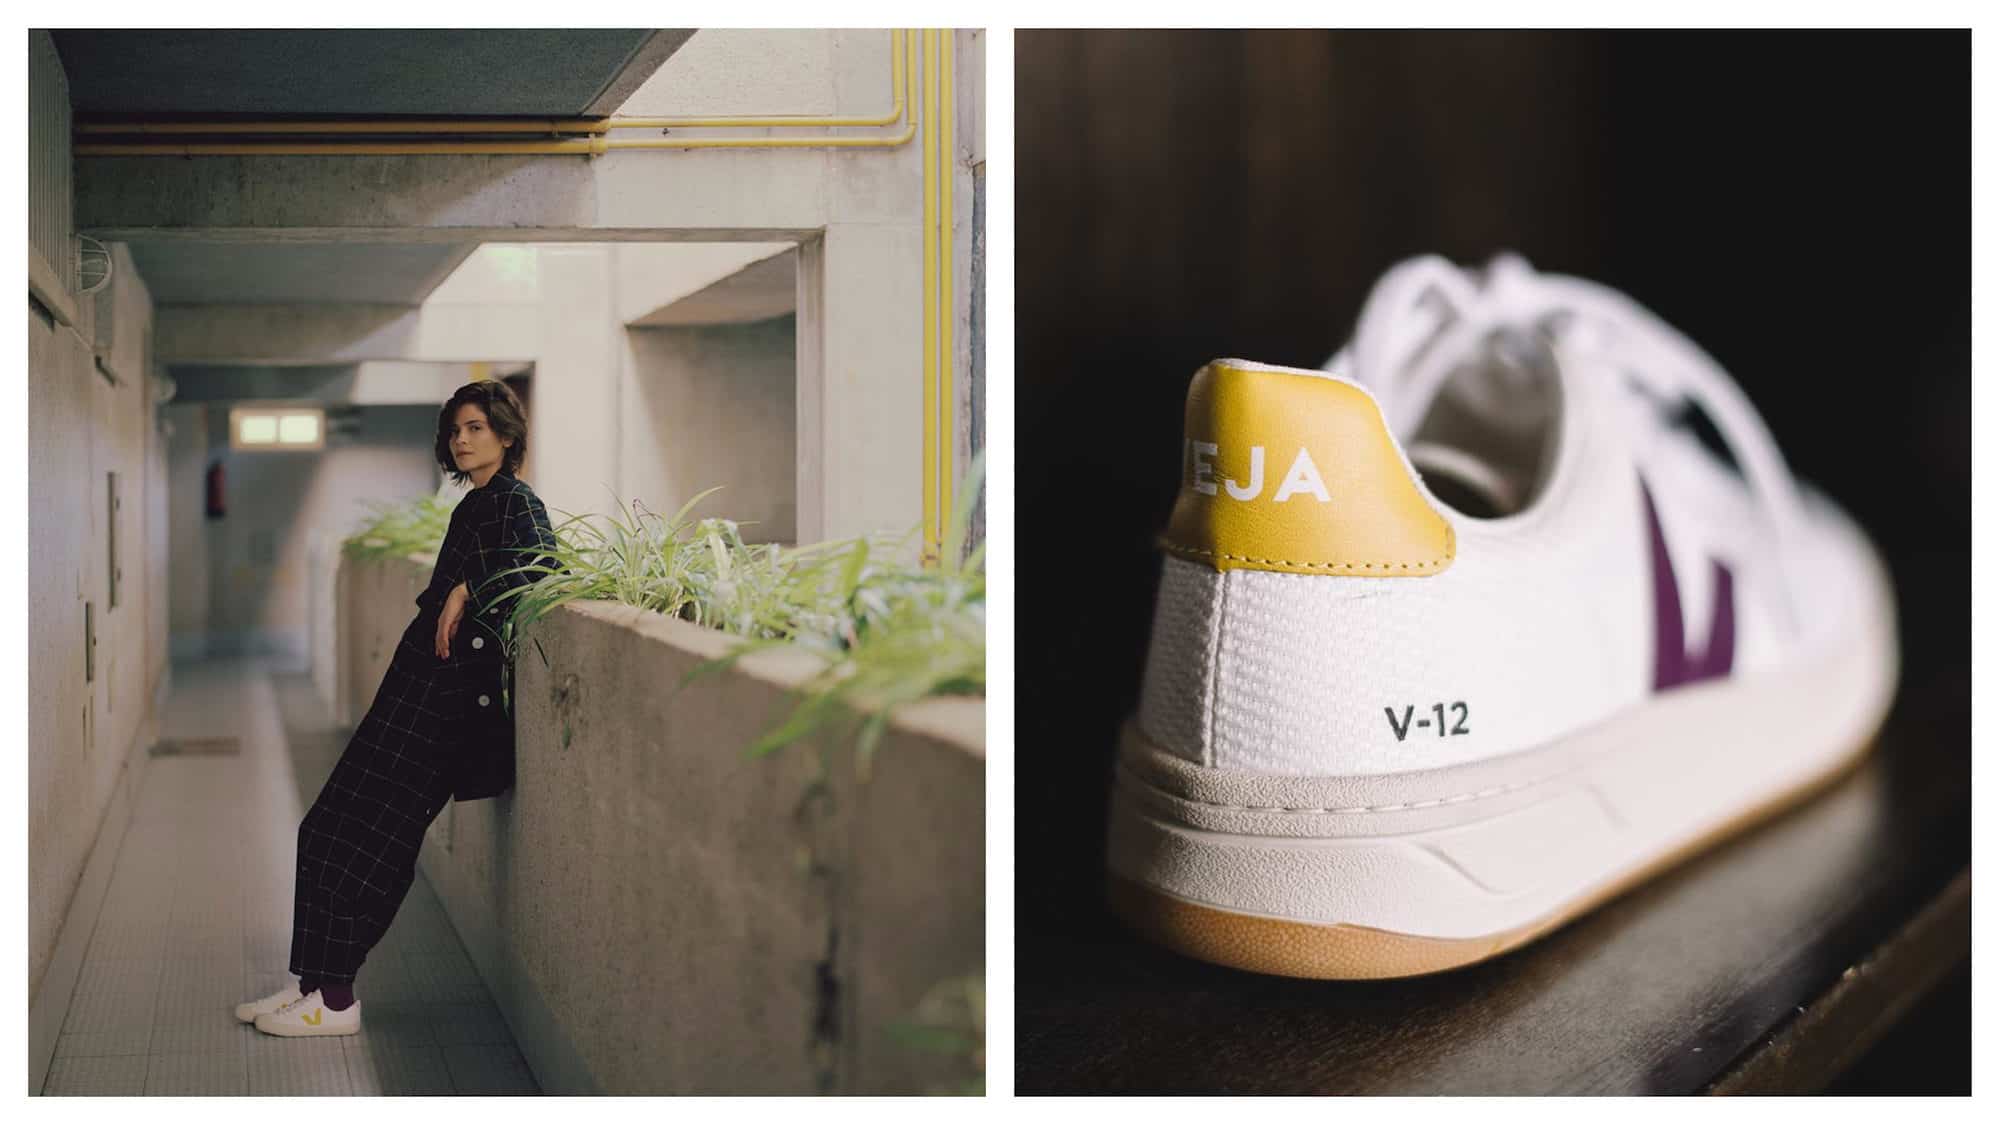 Get the right trainers to look like a Parisian, like these sustainably made Veja trainers worn by a model wearing cropped black trousers and a long blazer, as she leans against a concrete wall topped with plants (left). A pair of Veja trainers close-up (right).